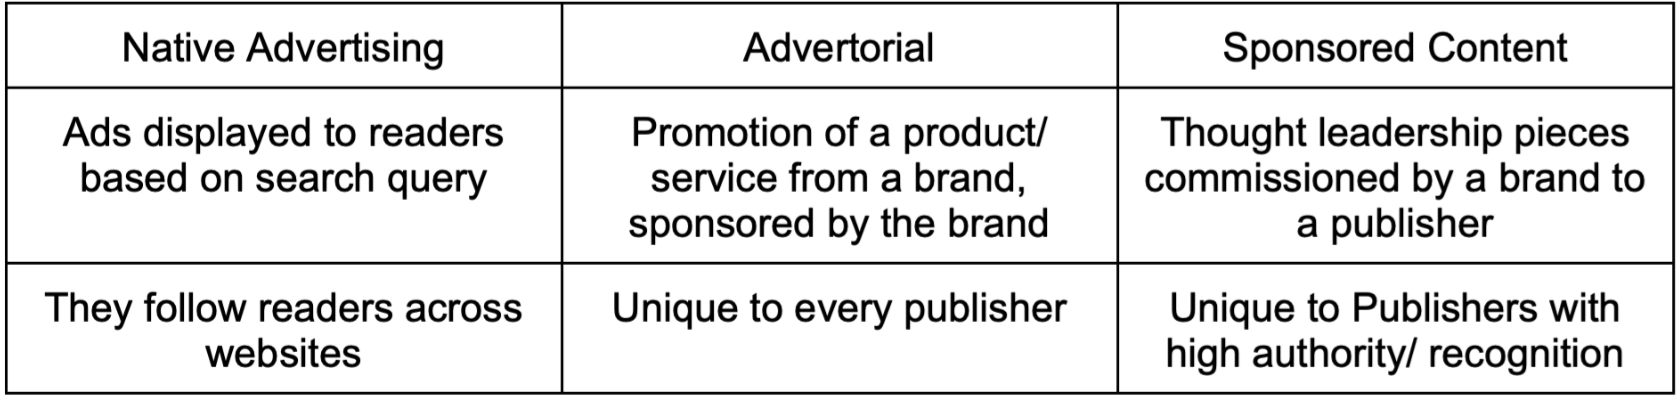 Difference in Native Advertising, Advertorial,Sponsored content